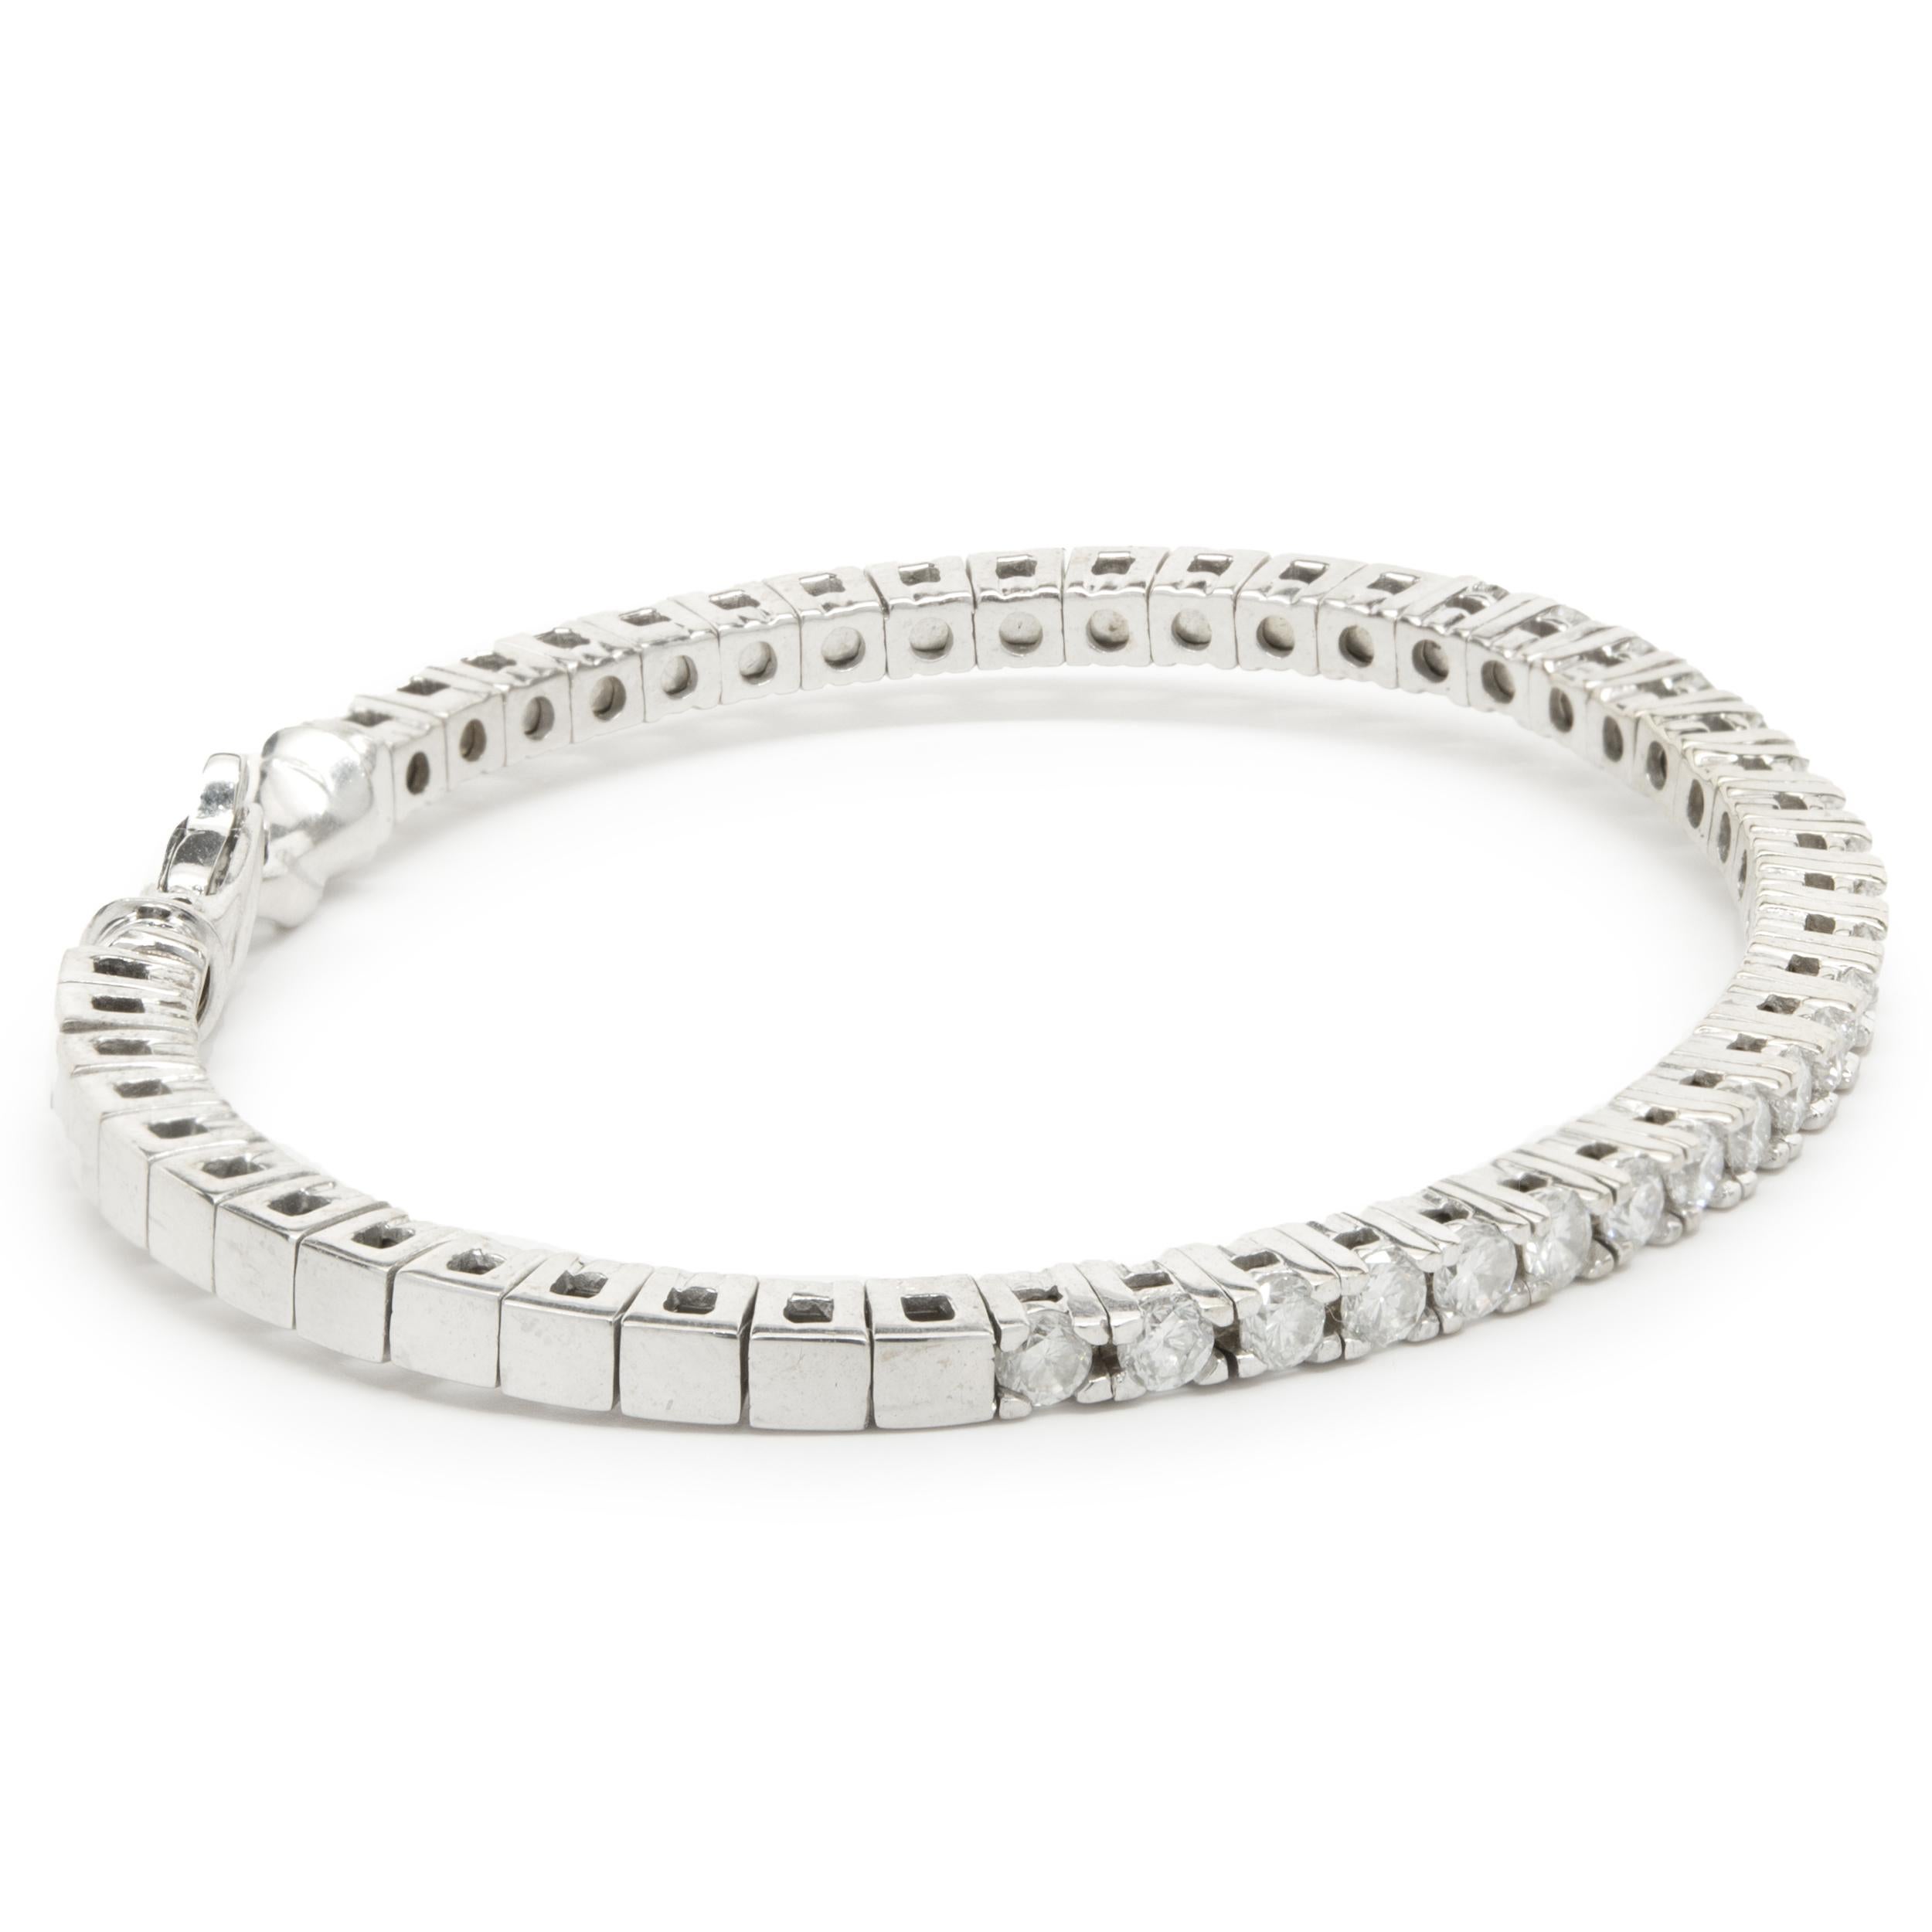 Designer: custom design
Material: 14K white gold
Diamonds: 22 round brilliant cut = 1.54cttw
Color: G / H 
Clarity: SI1
Dimensions: bracelet will fit up to a 7.5-inch wrist
Weight: 17.26 grams